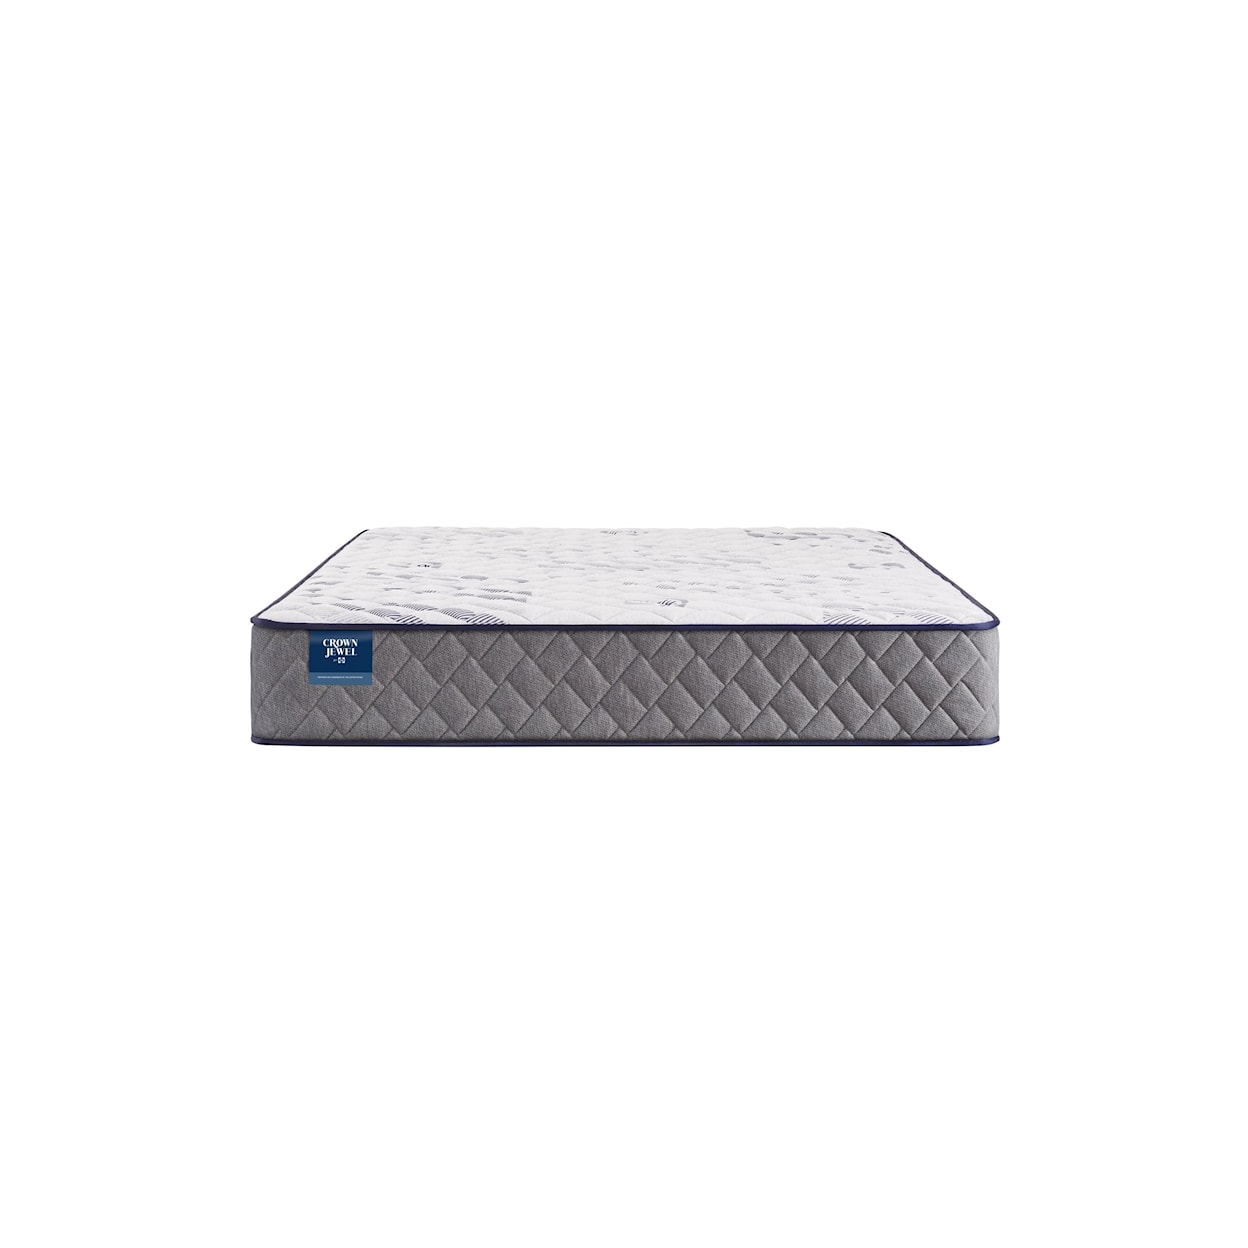 Sealy Crown Jewel S2 Jewel Nile  Soft Tight Top Double Mattress